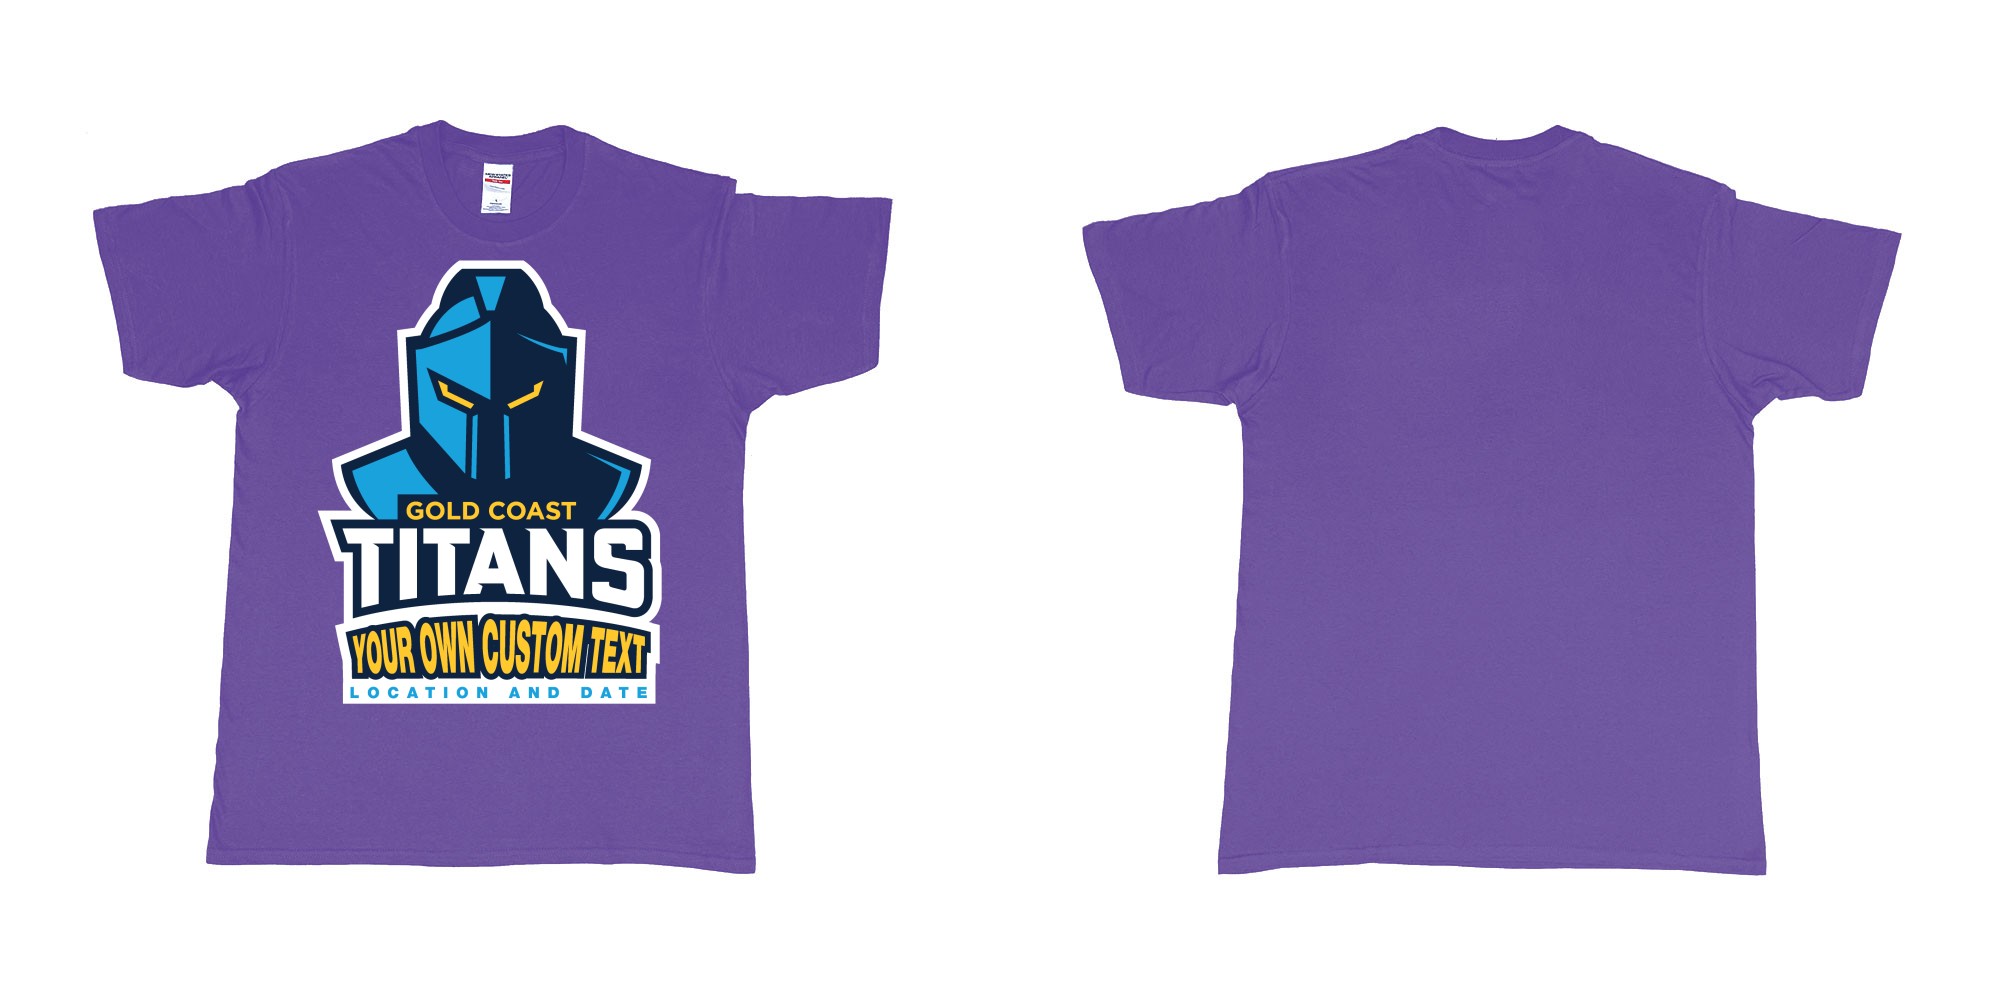 Custom tshirt design gold coast titans own custom design print in fabric color purple choice your own text made in Bali by The Pirate Way